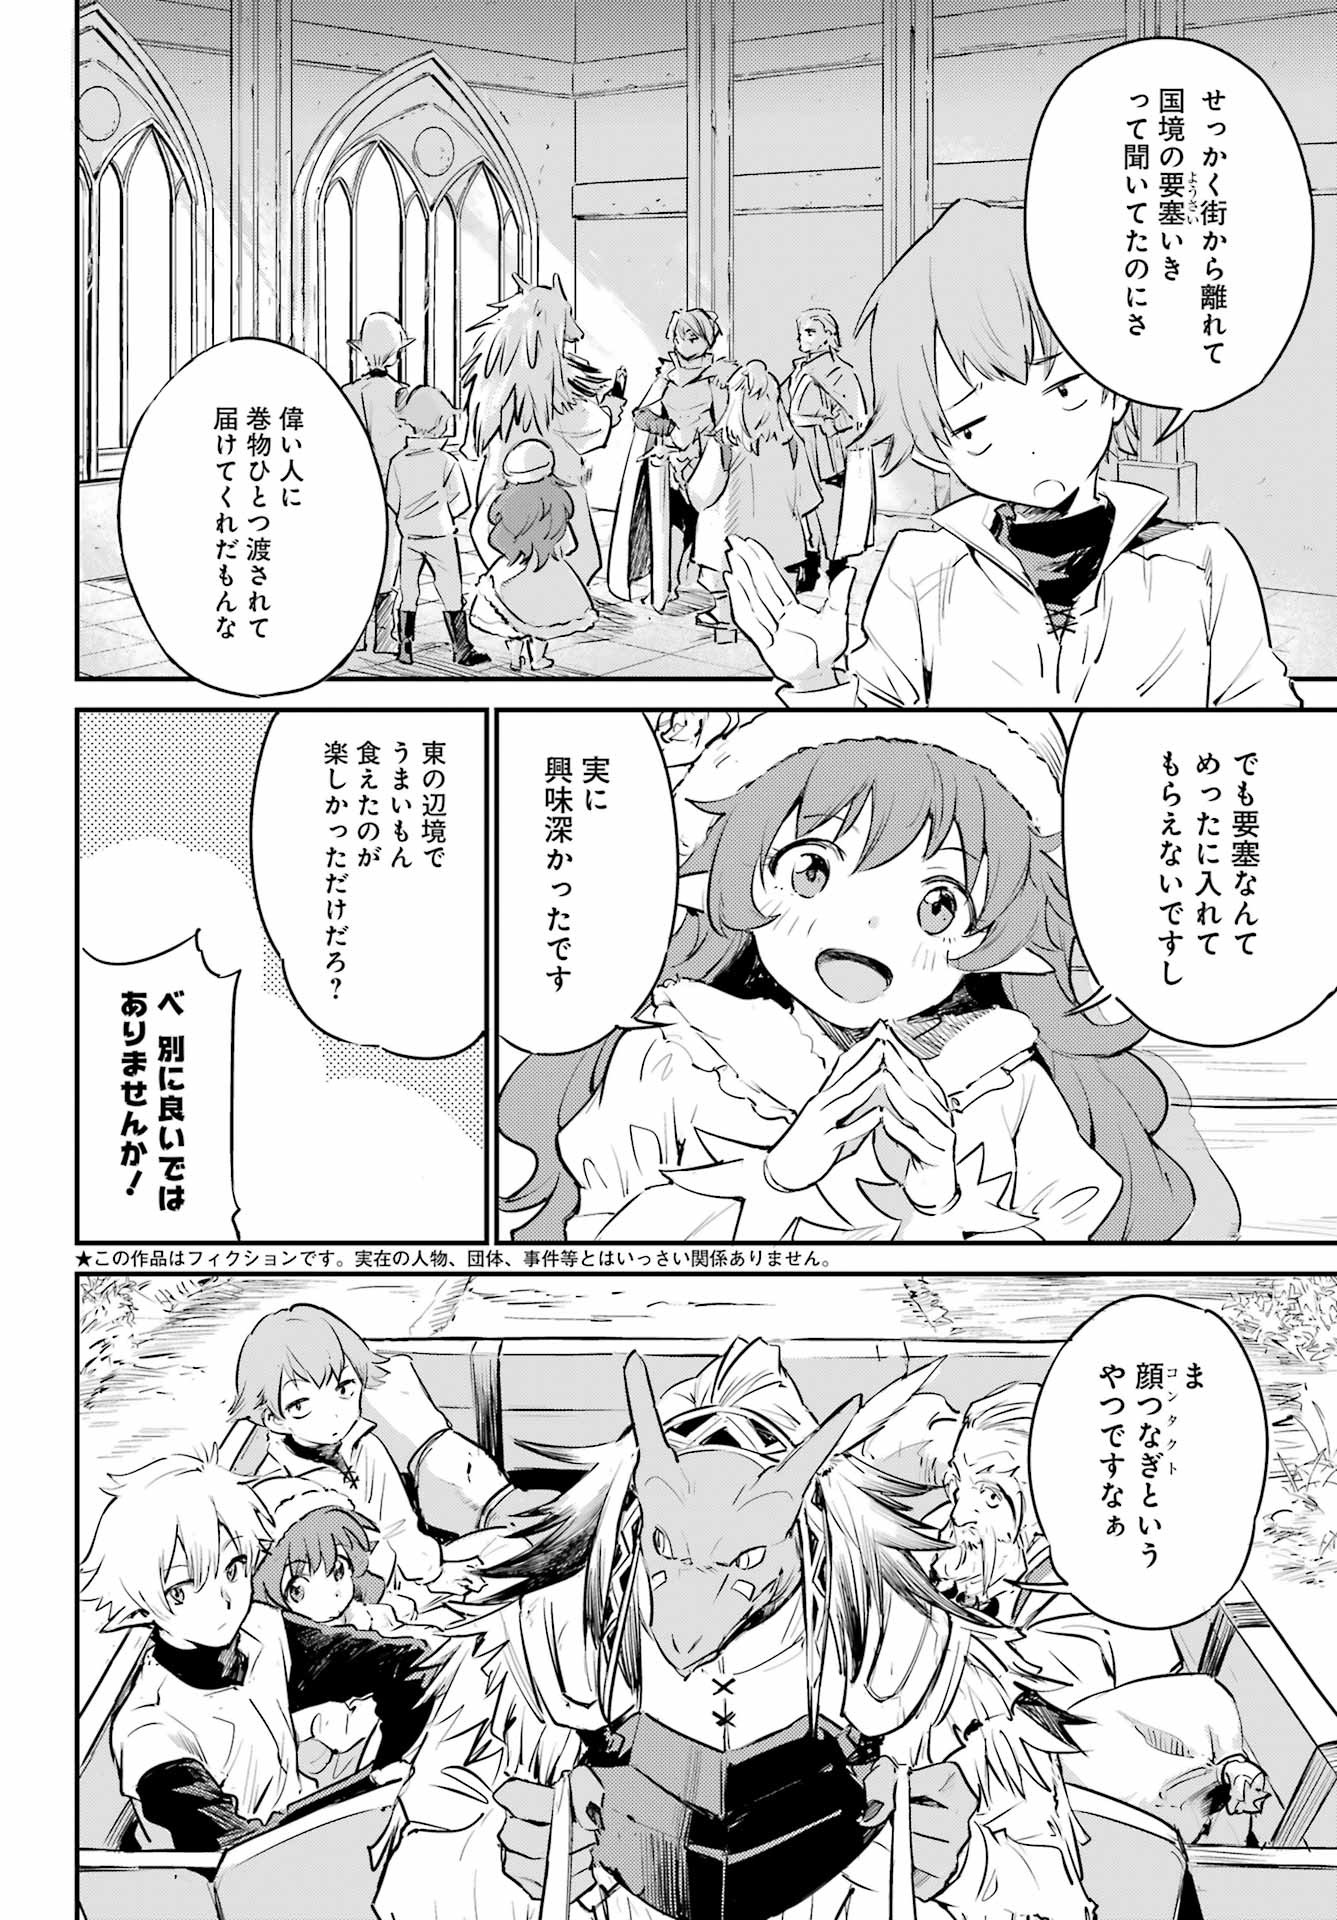 Goblin Slayer: Day in the Life - Chapter 04.5 - Page 2